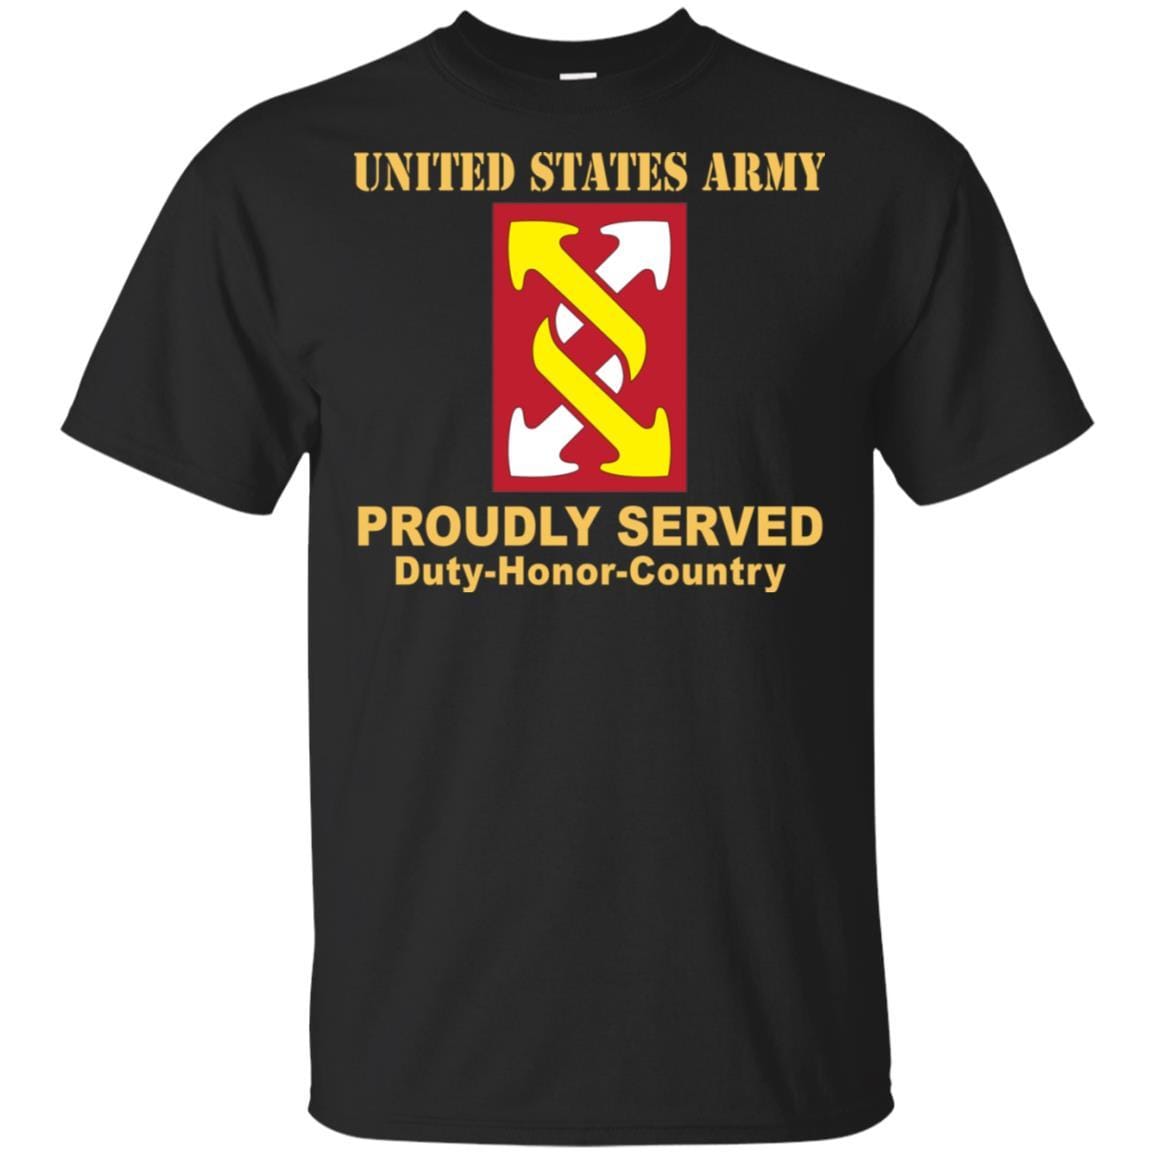 US ARMY 143RD SUSTAINMENT BRIGADE- Proudly Served T-Shirt On Front For Men-TShirt-Army-Veterans Nation